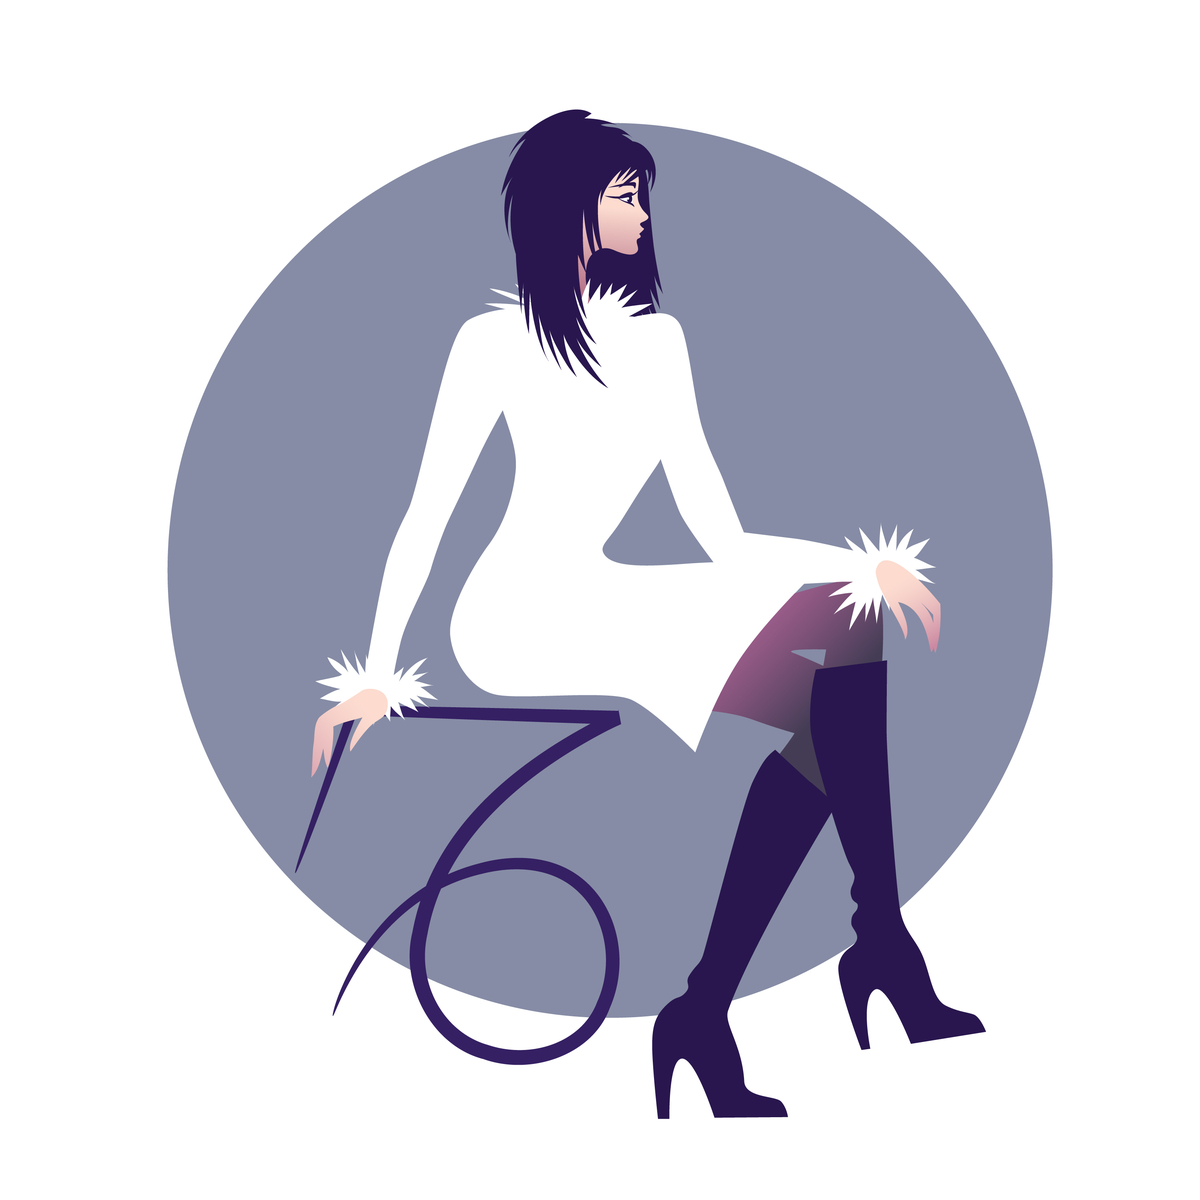 Woman with white dress and knee-high boots sitting on the Capricorn Zodiac Sign next to her.